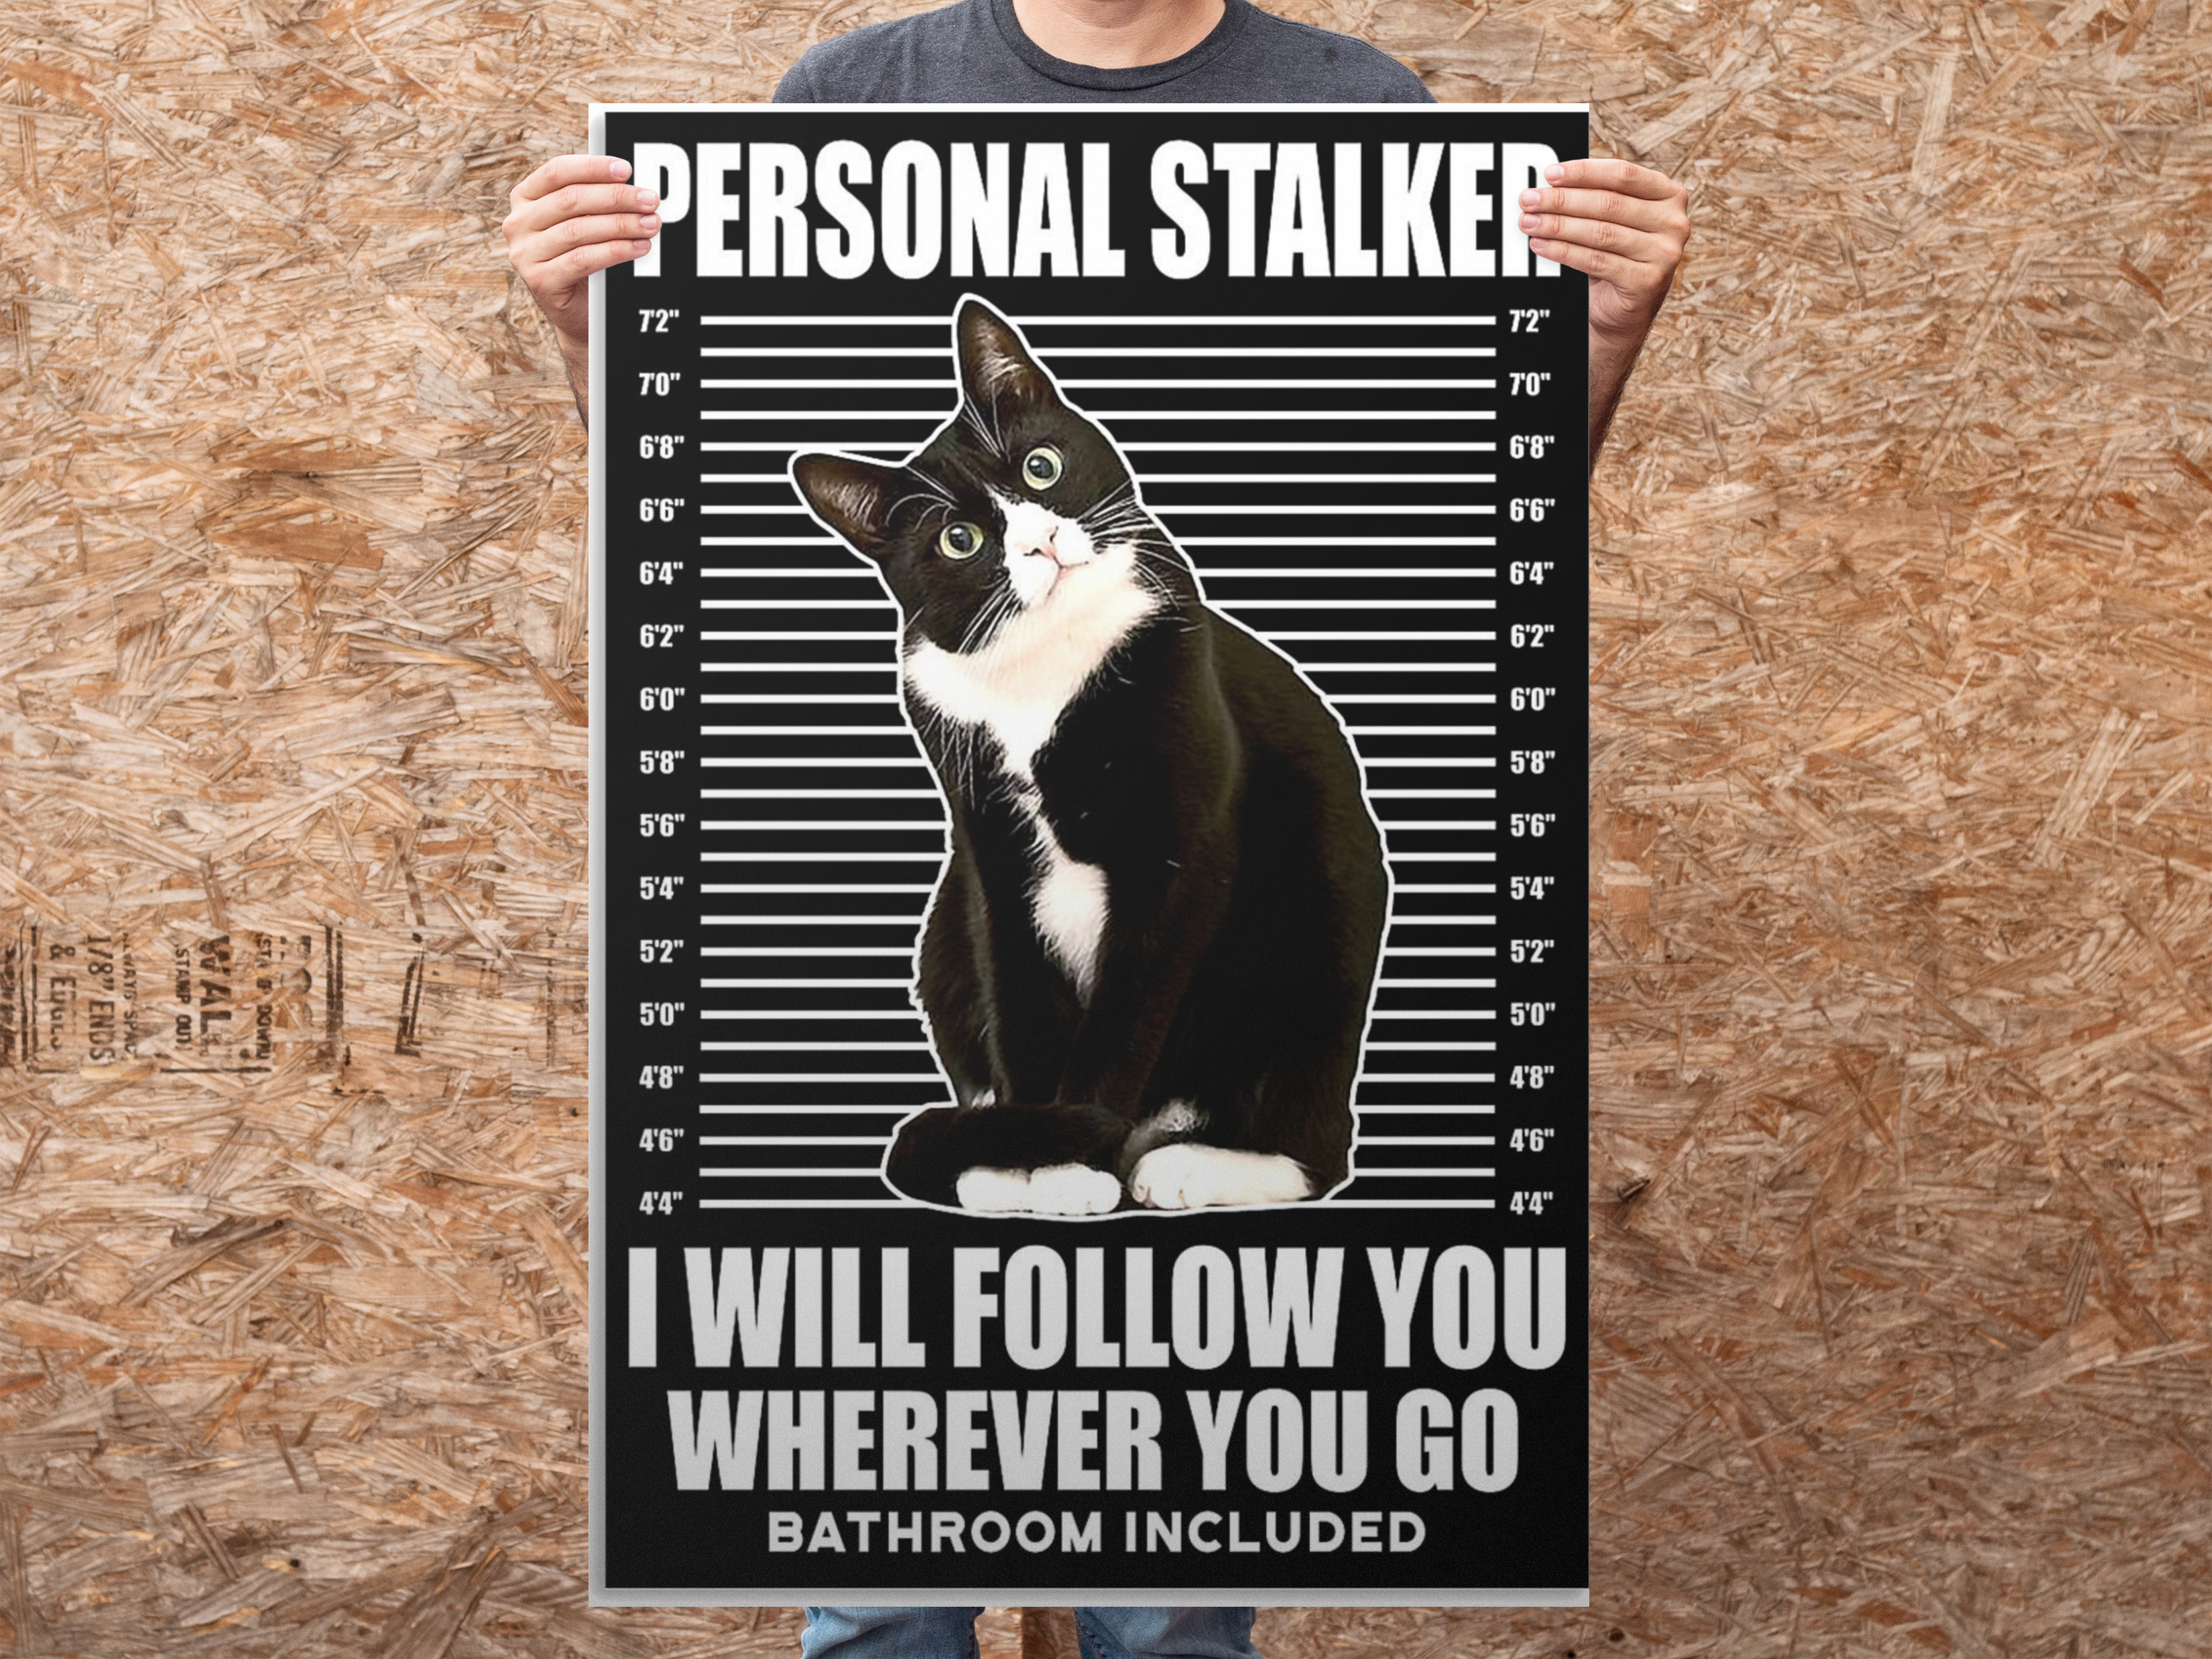 Cat Personal stalker I will follow you wherever you go bathroom included poster 2